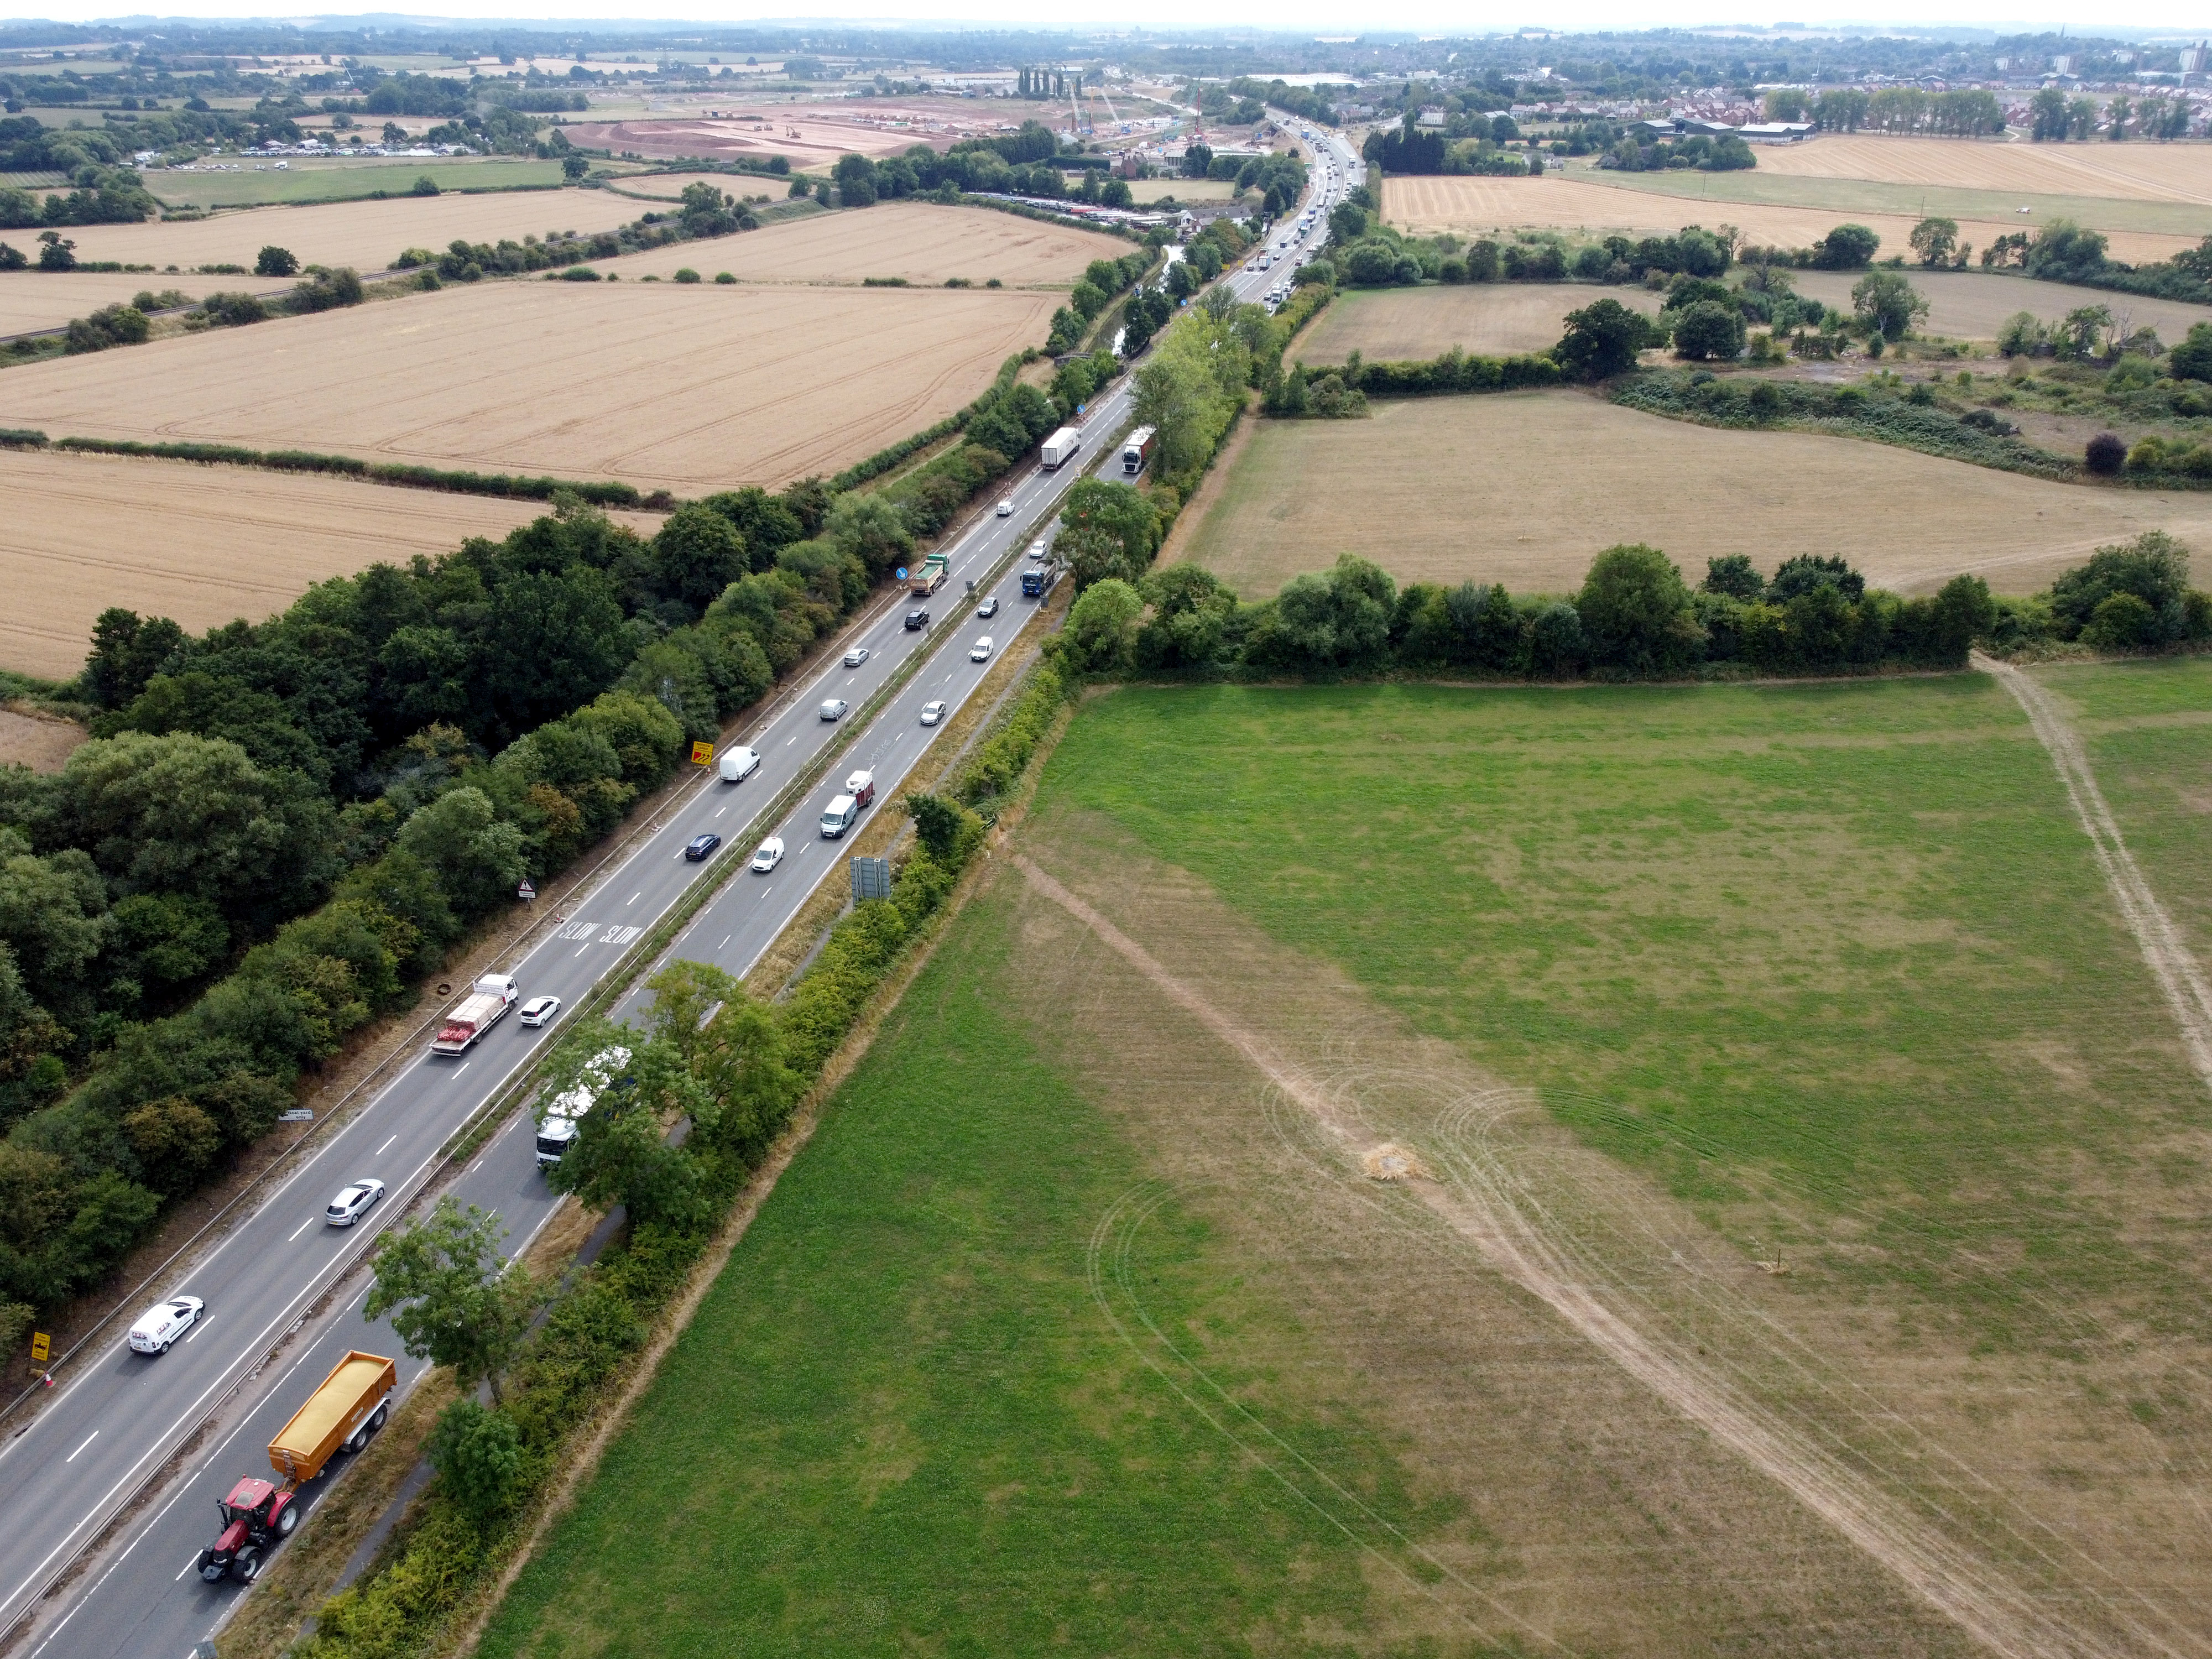 Vital A38 upgrades to support thousands of new homes and jobs in Worcestershire